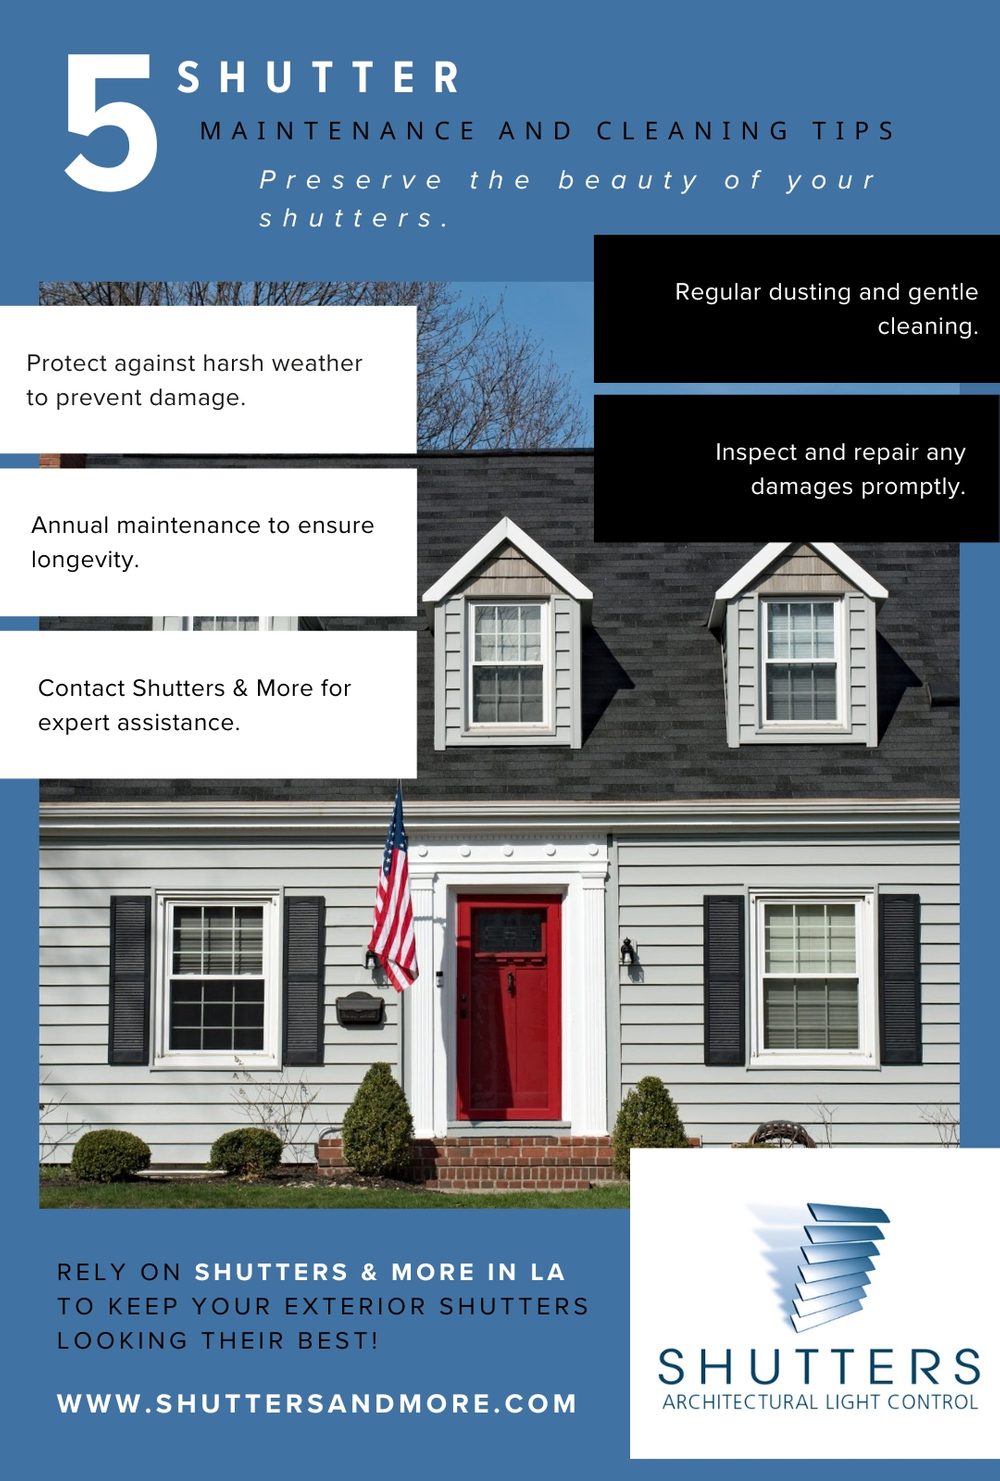 M24870 - Infographic - 5 Shutter Maintenance and Cleaning Tips.jpg